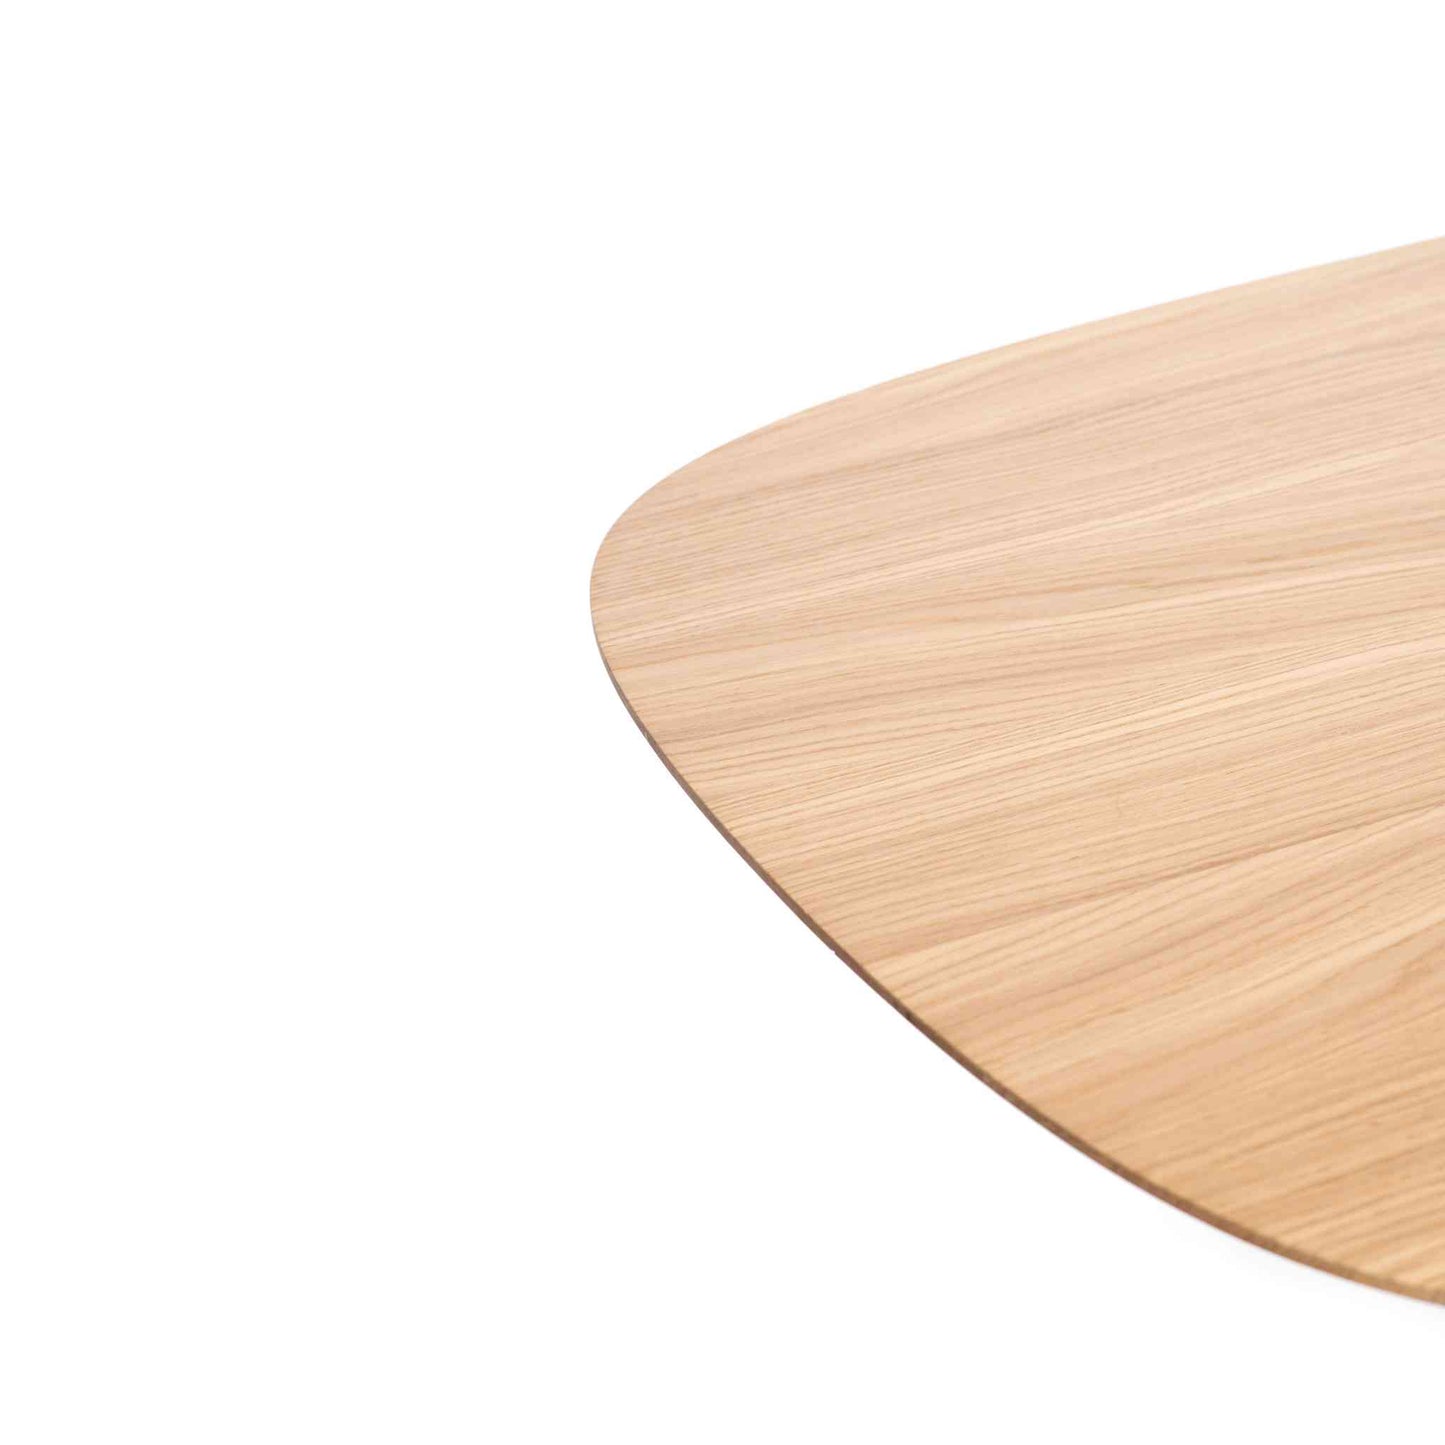 Tabletop detail of the Oval Eiger Solid Oak Wood Table